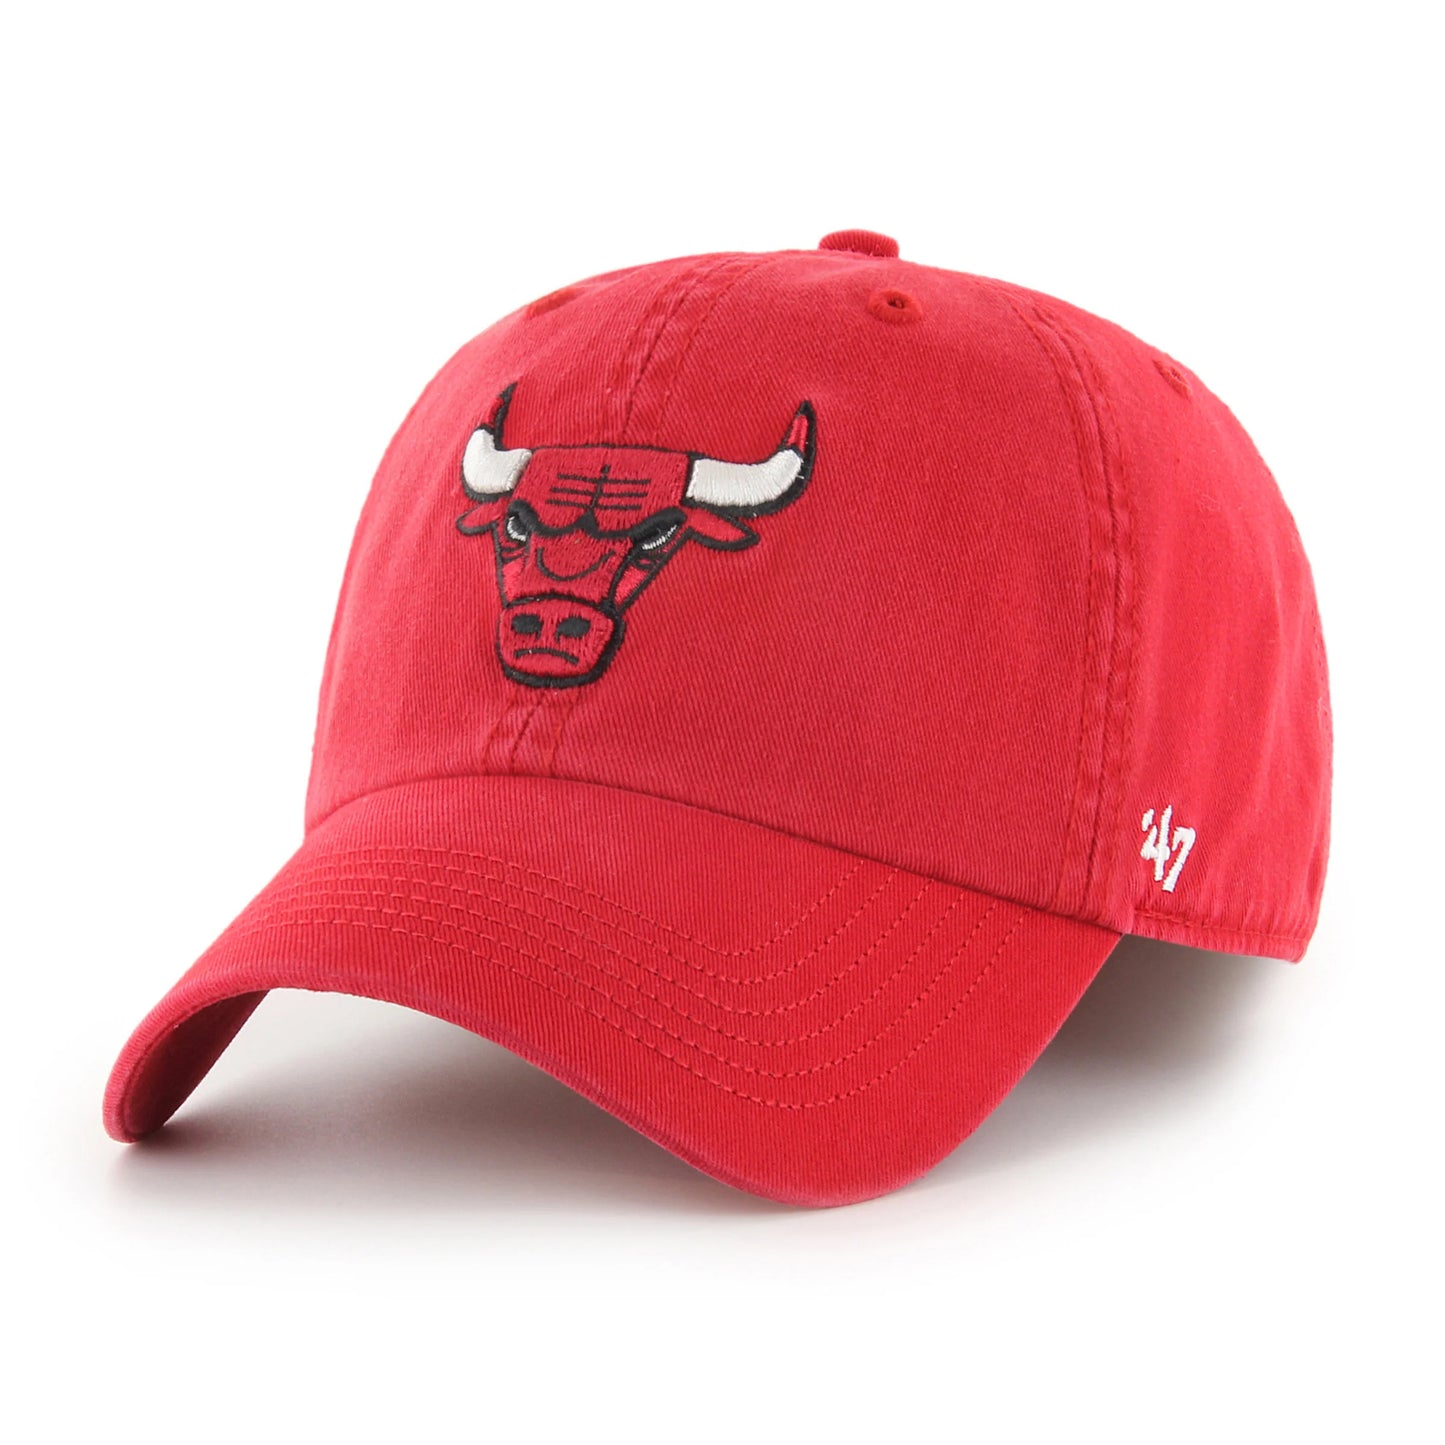 Chicago Bulls Red Fitted Franchise Cap by '47 Brand